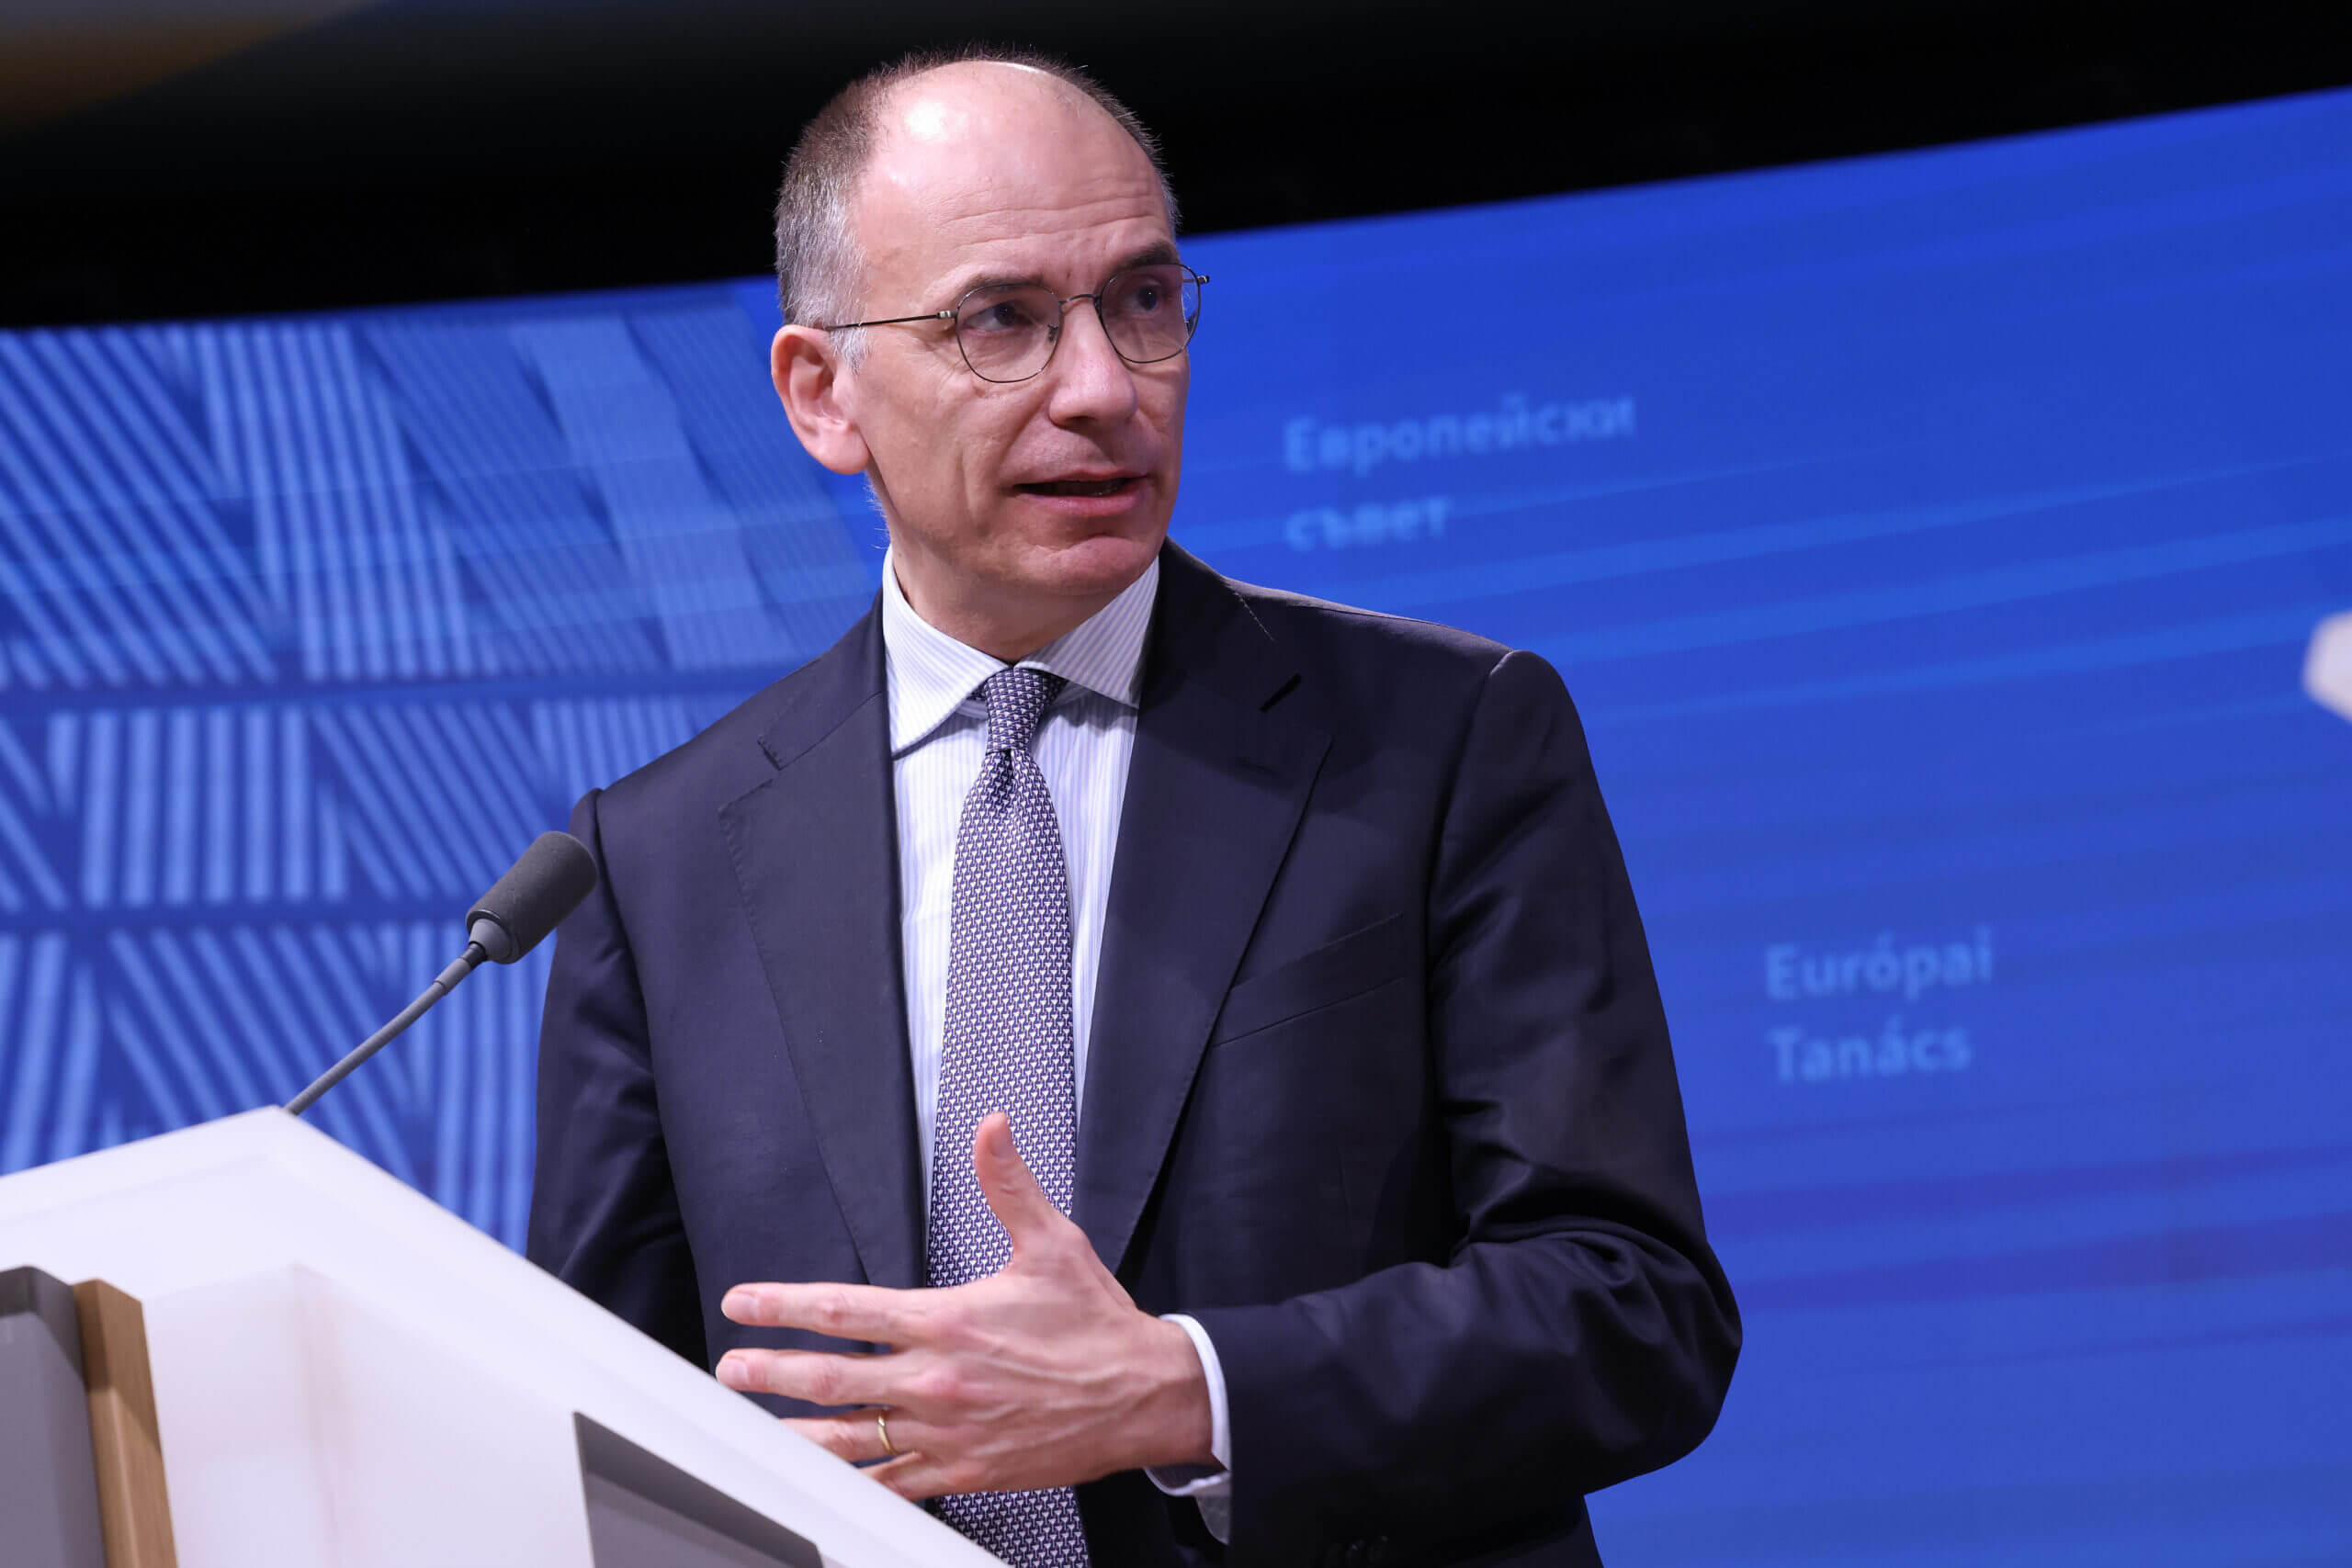 Enrico Letta - Presentation of the Much More than a Market report ©EuroNews